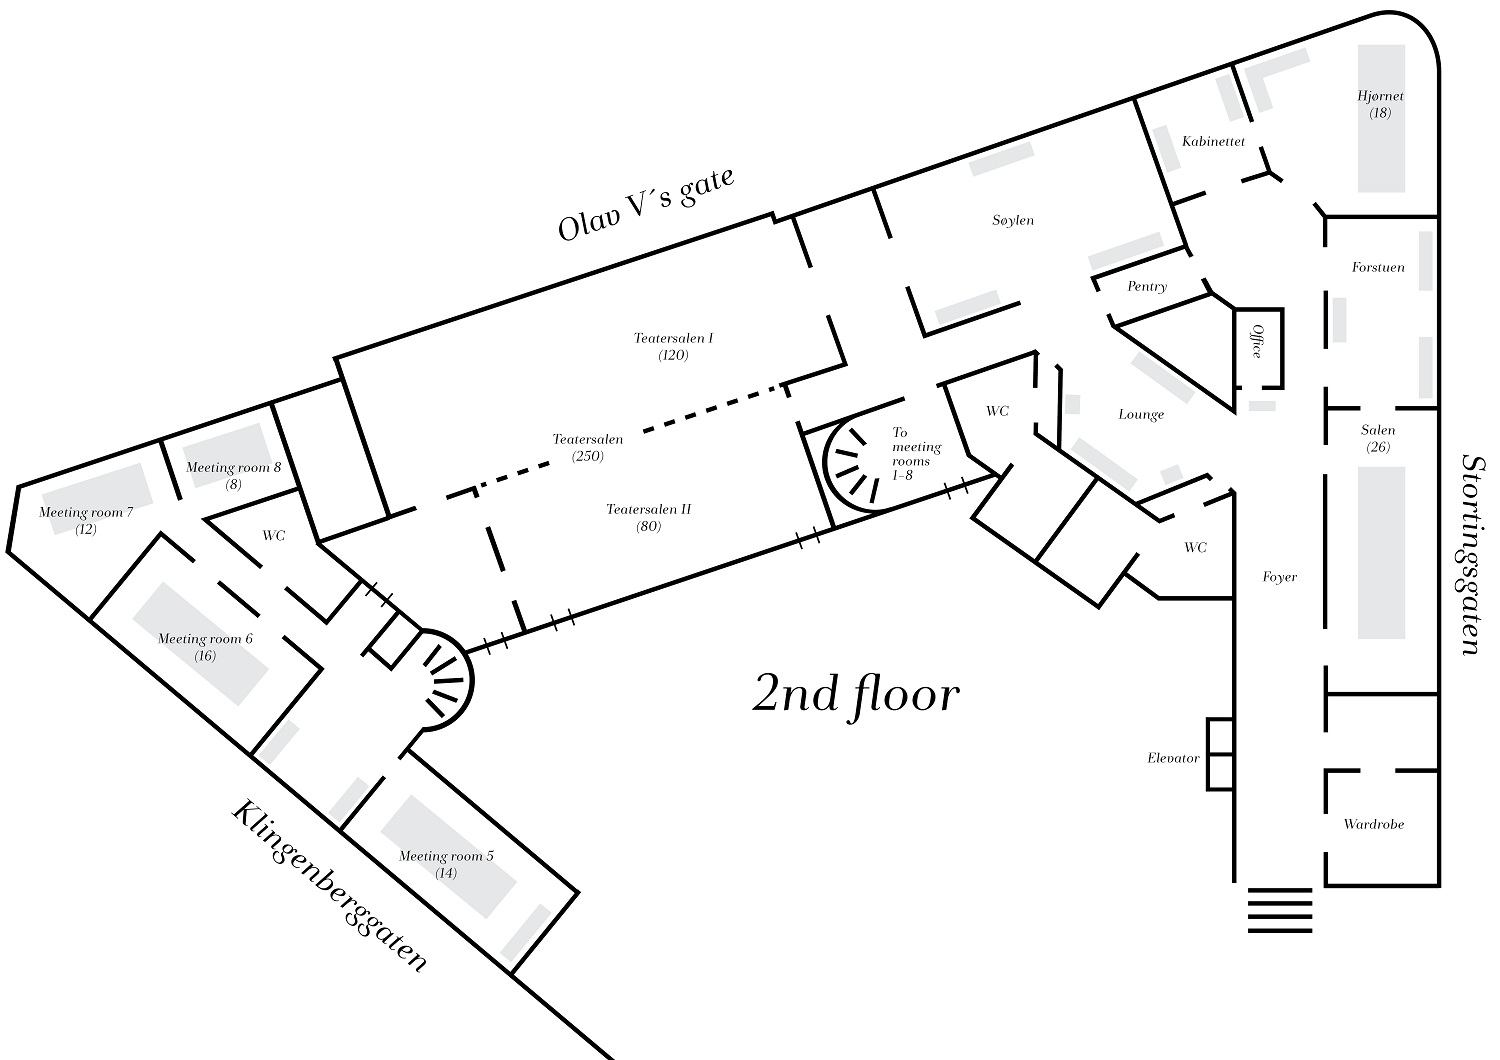 Floor plan over venues at Continental in Oslo